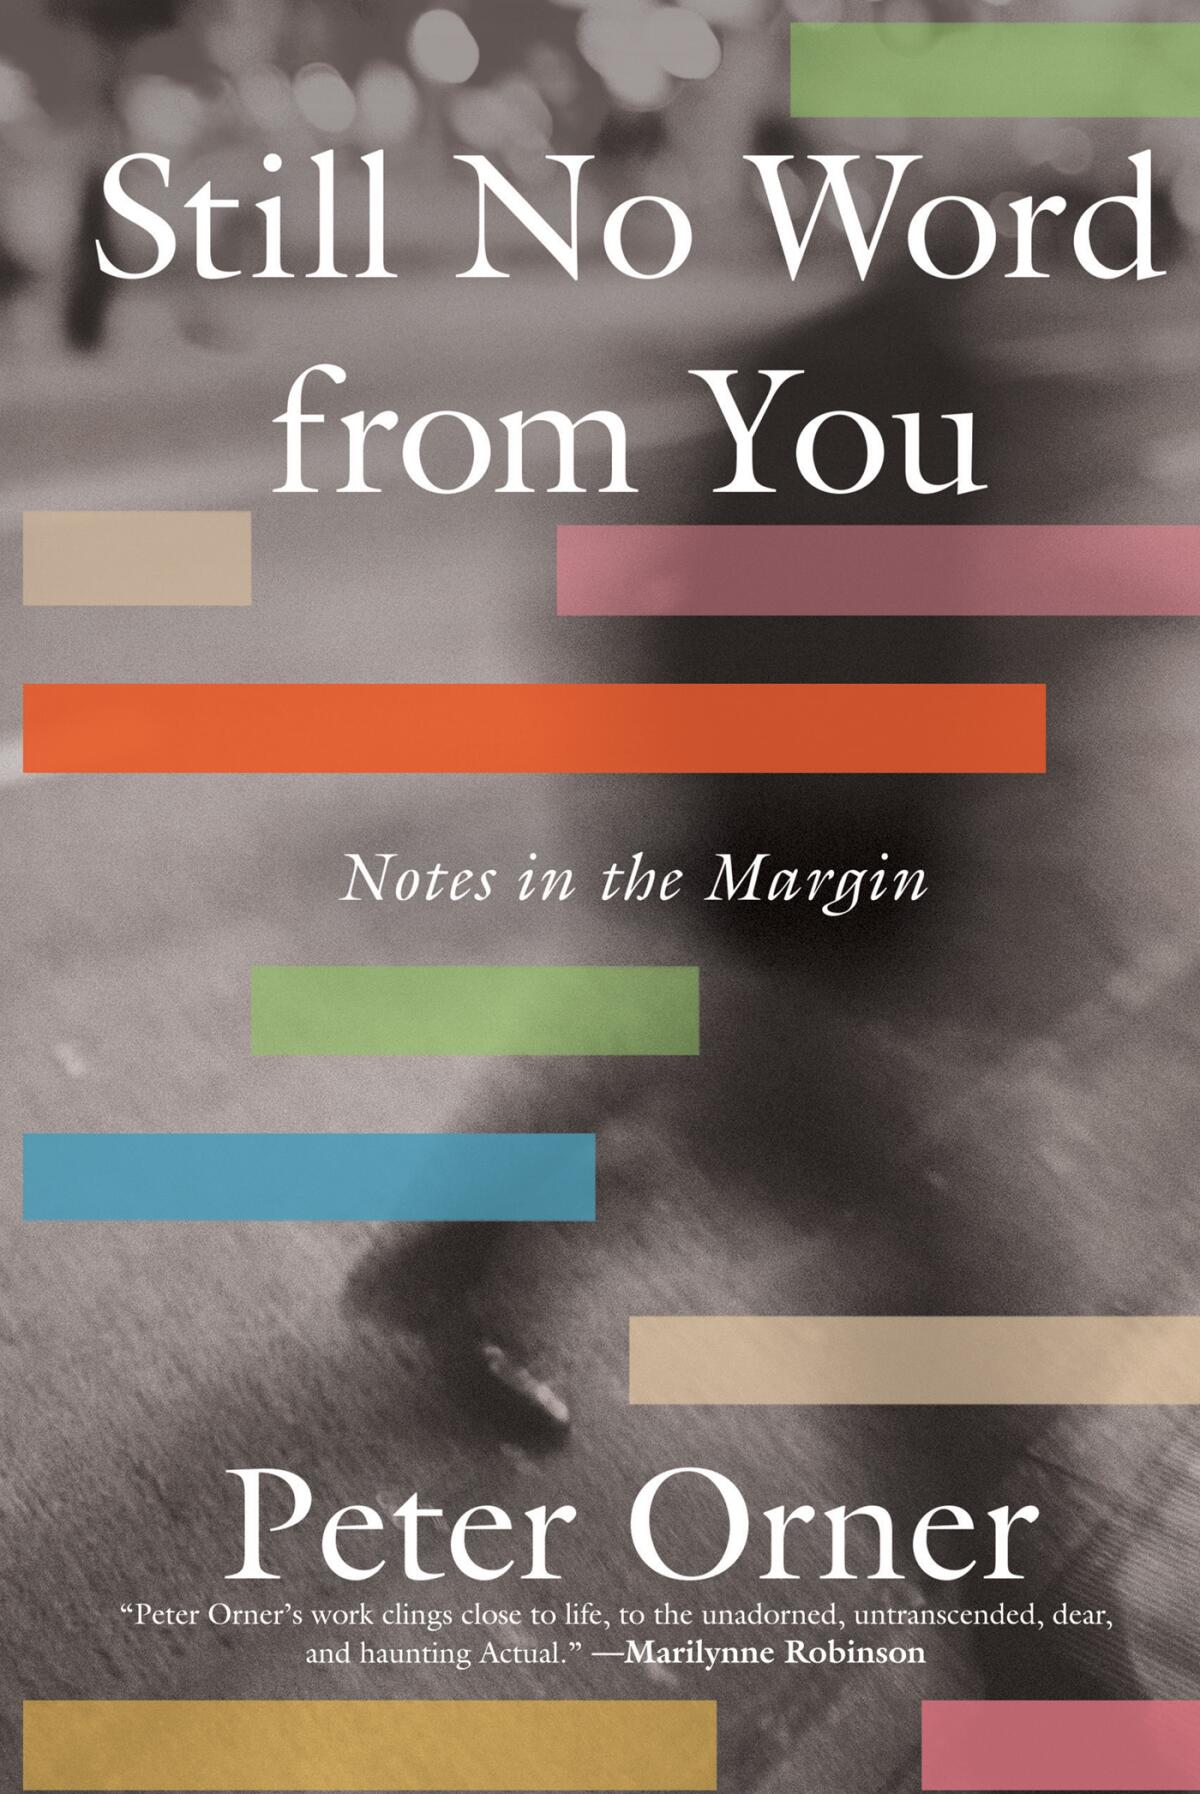 "Still No Word from You: Notes in the Margin," by Peter Orner